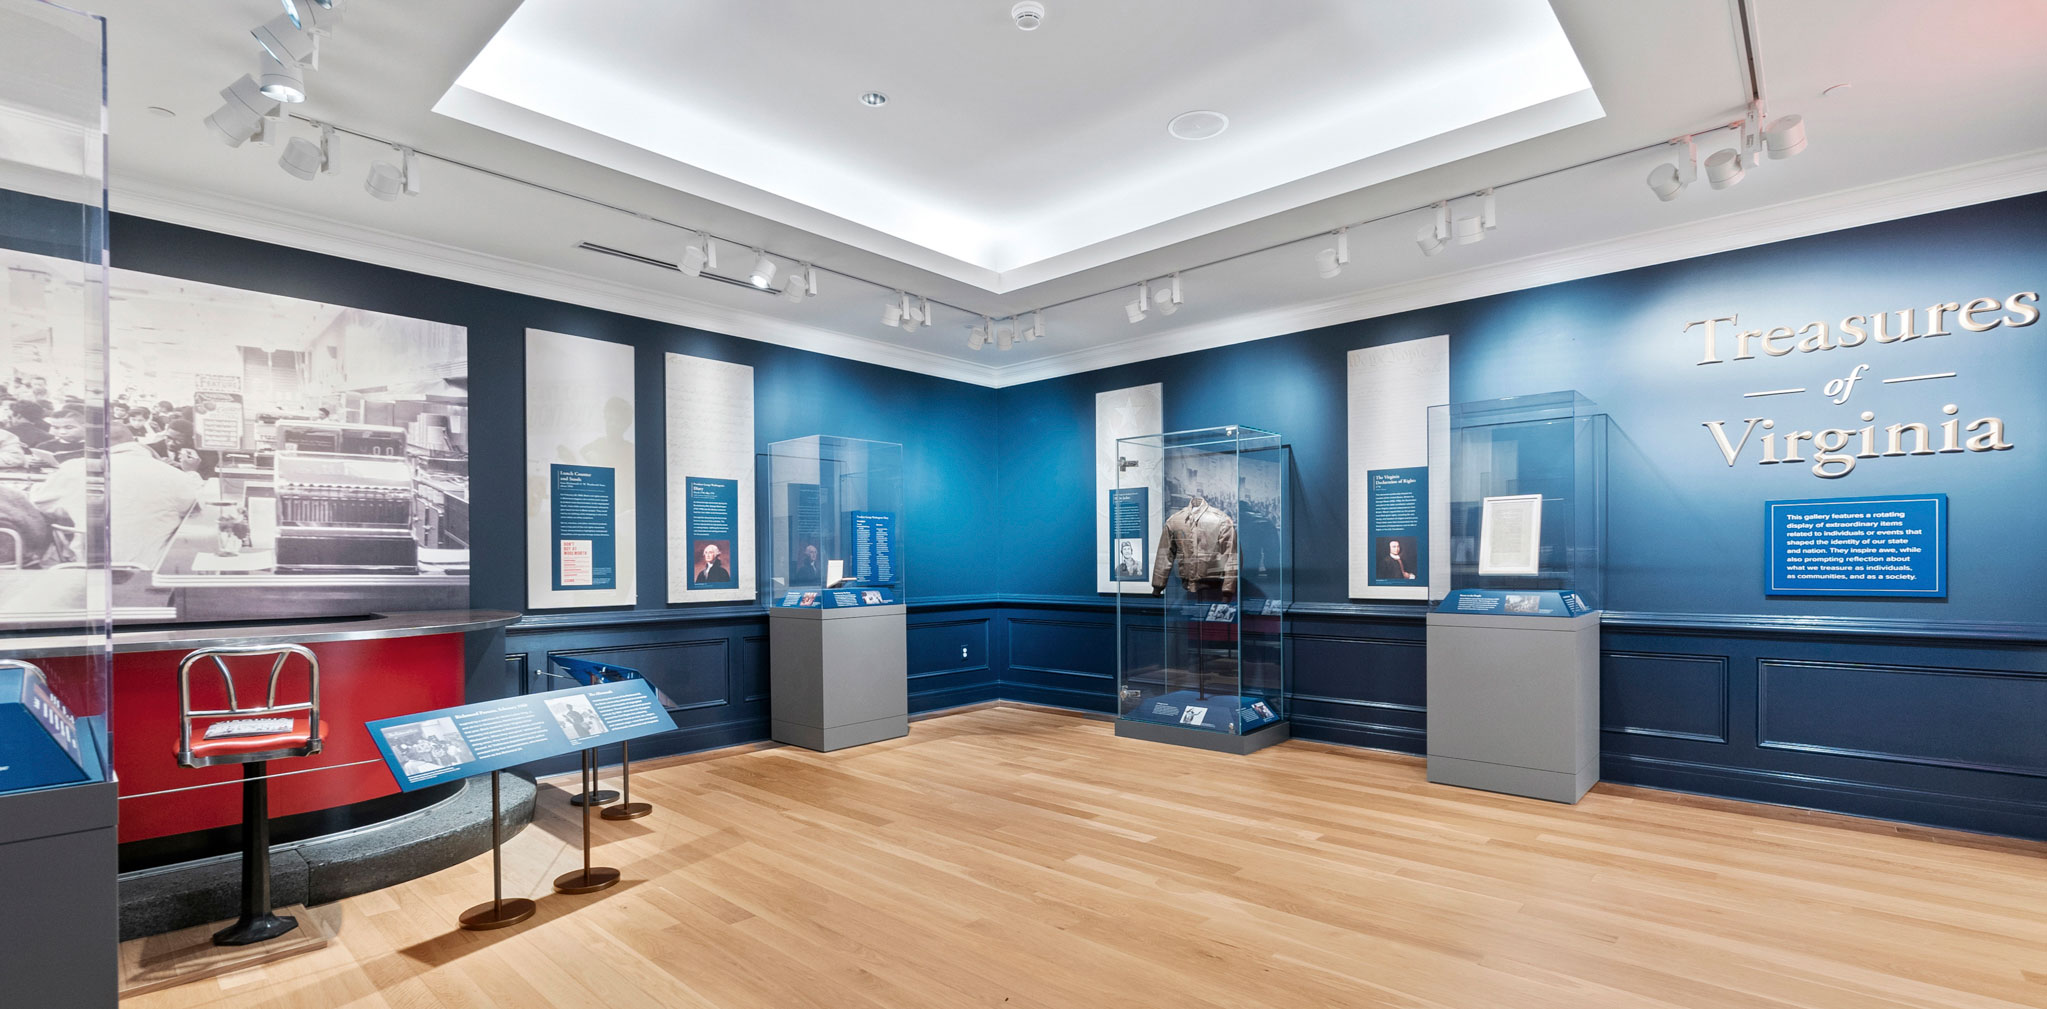 A gallery with blue walls, objects in display cases, and lettering that reads Treasures of Virginia